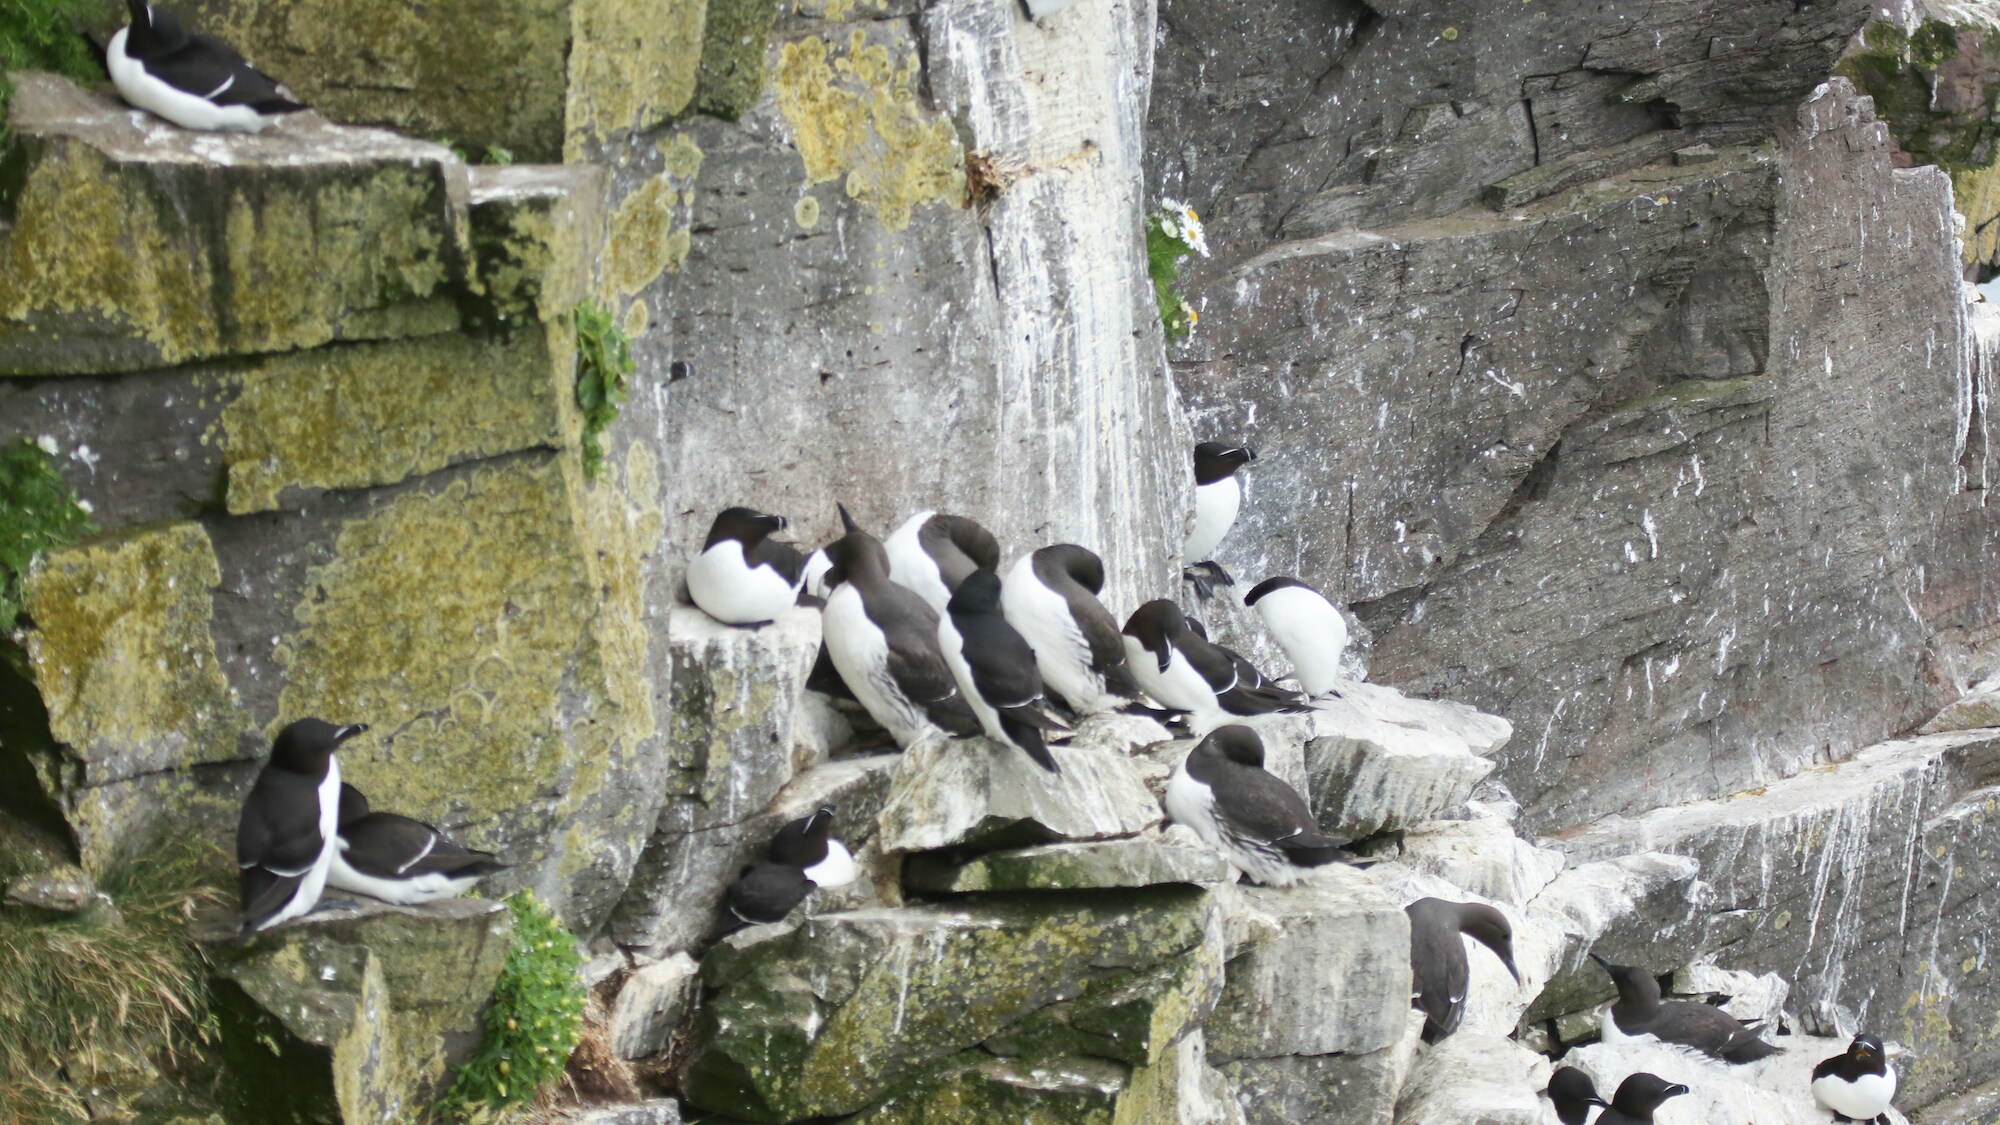 A group of guillemots bunching onto a cliff face. (National Geographic for Disney+/Jonjo Harrington)